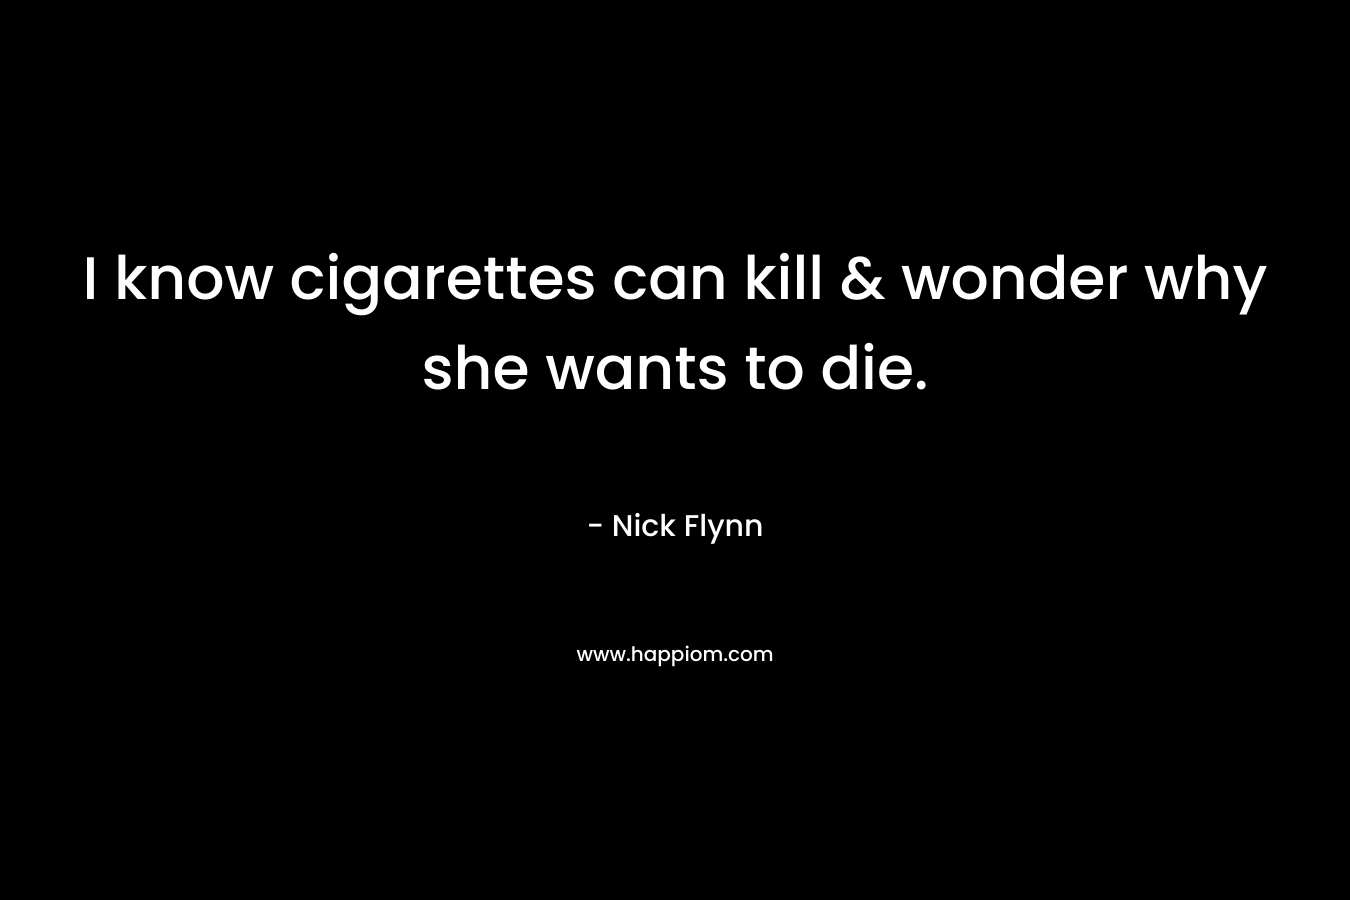 I know cigarettes can kill & wonder why she wants to die.